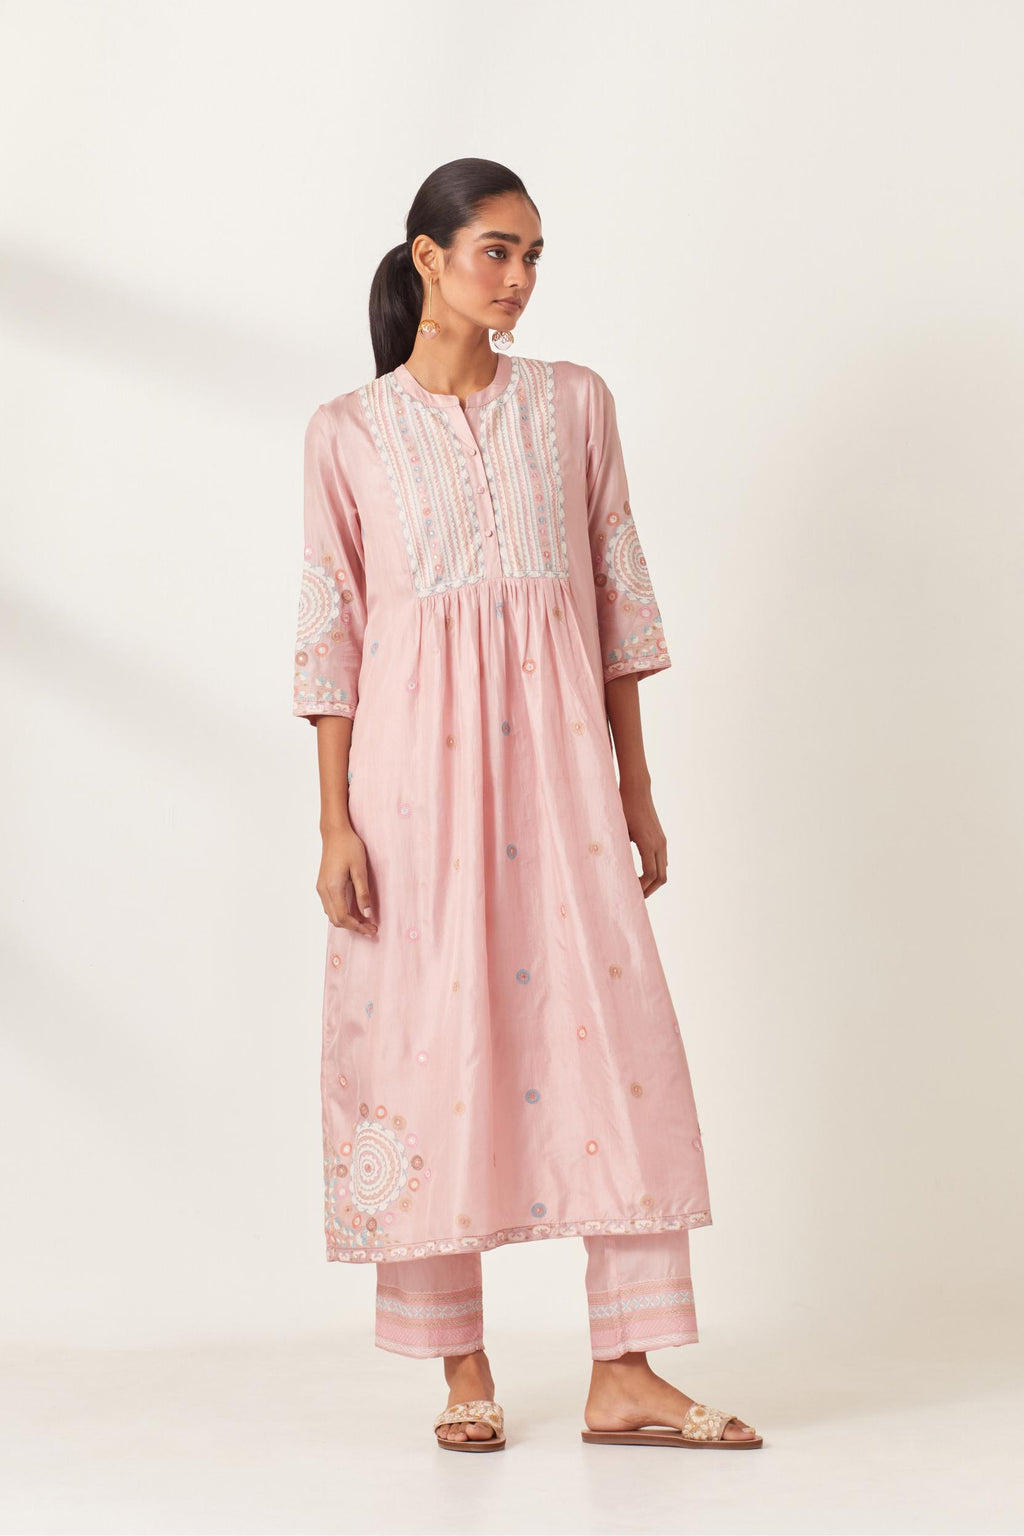 Pink silk gathered kurta-dress set with appliqué stripes along with aari threadwork flowers and floral trellises along with a circular appliqued motif.